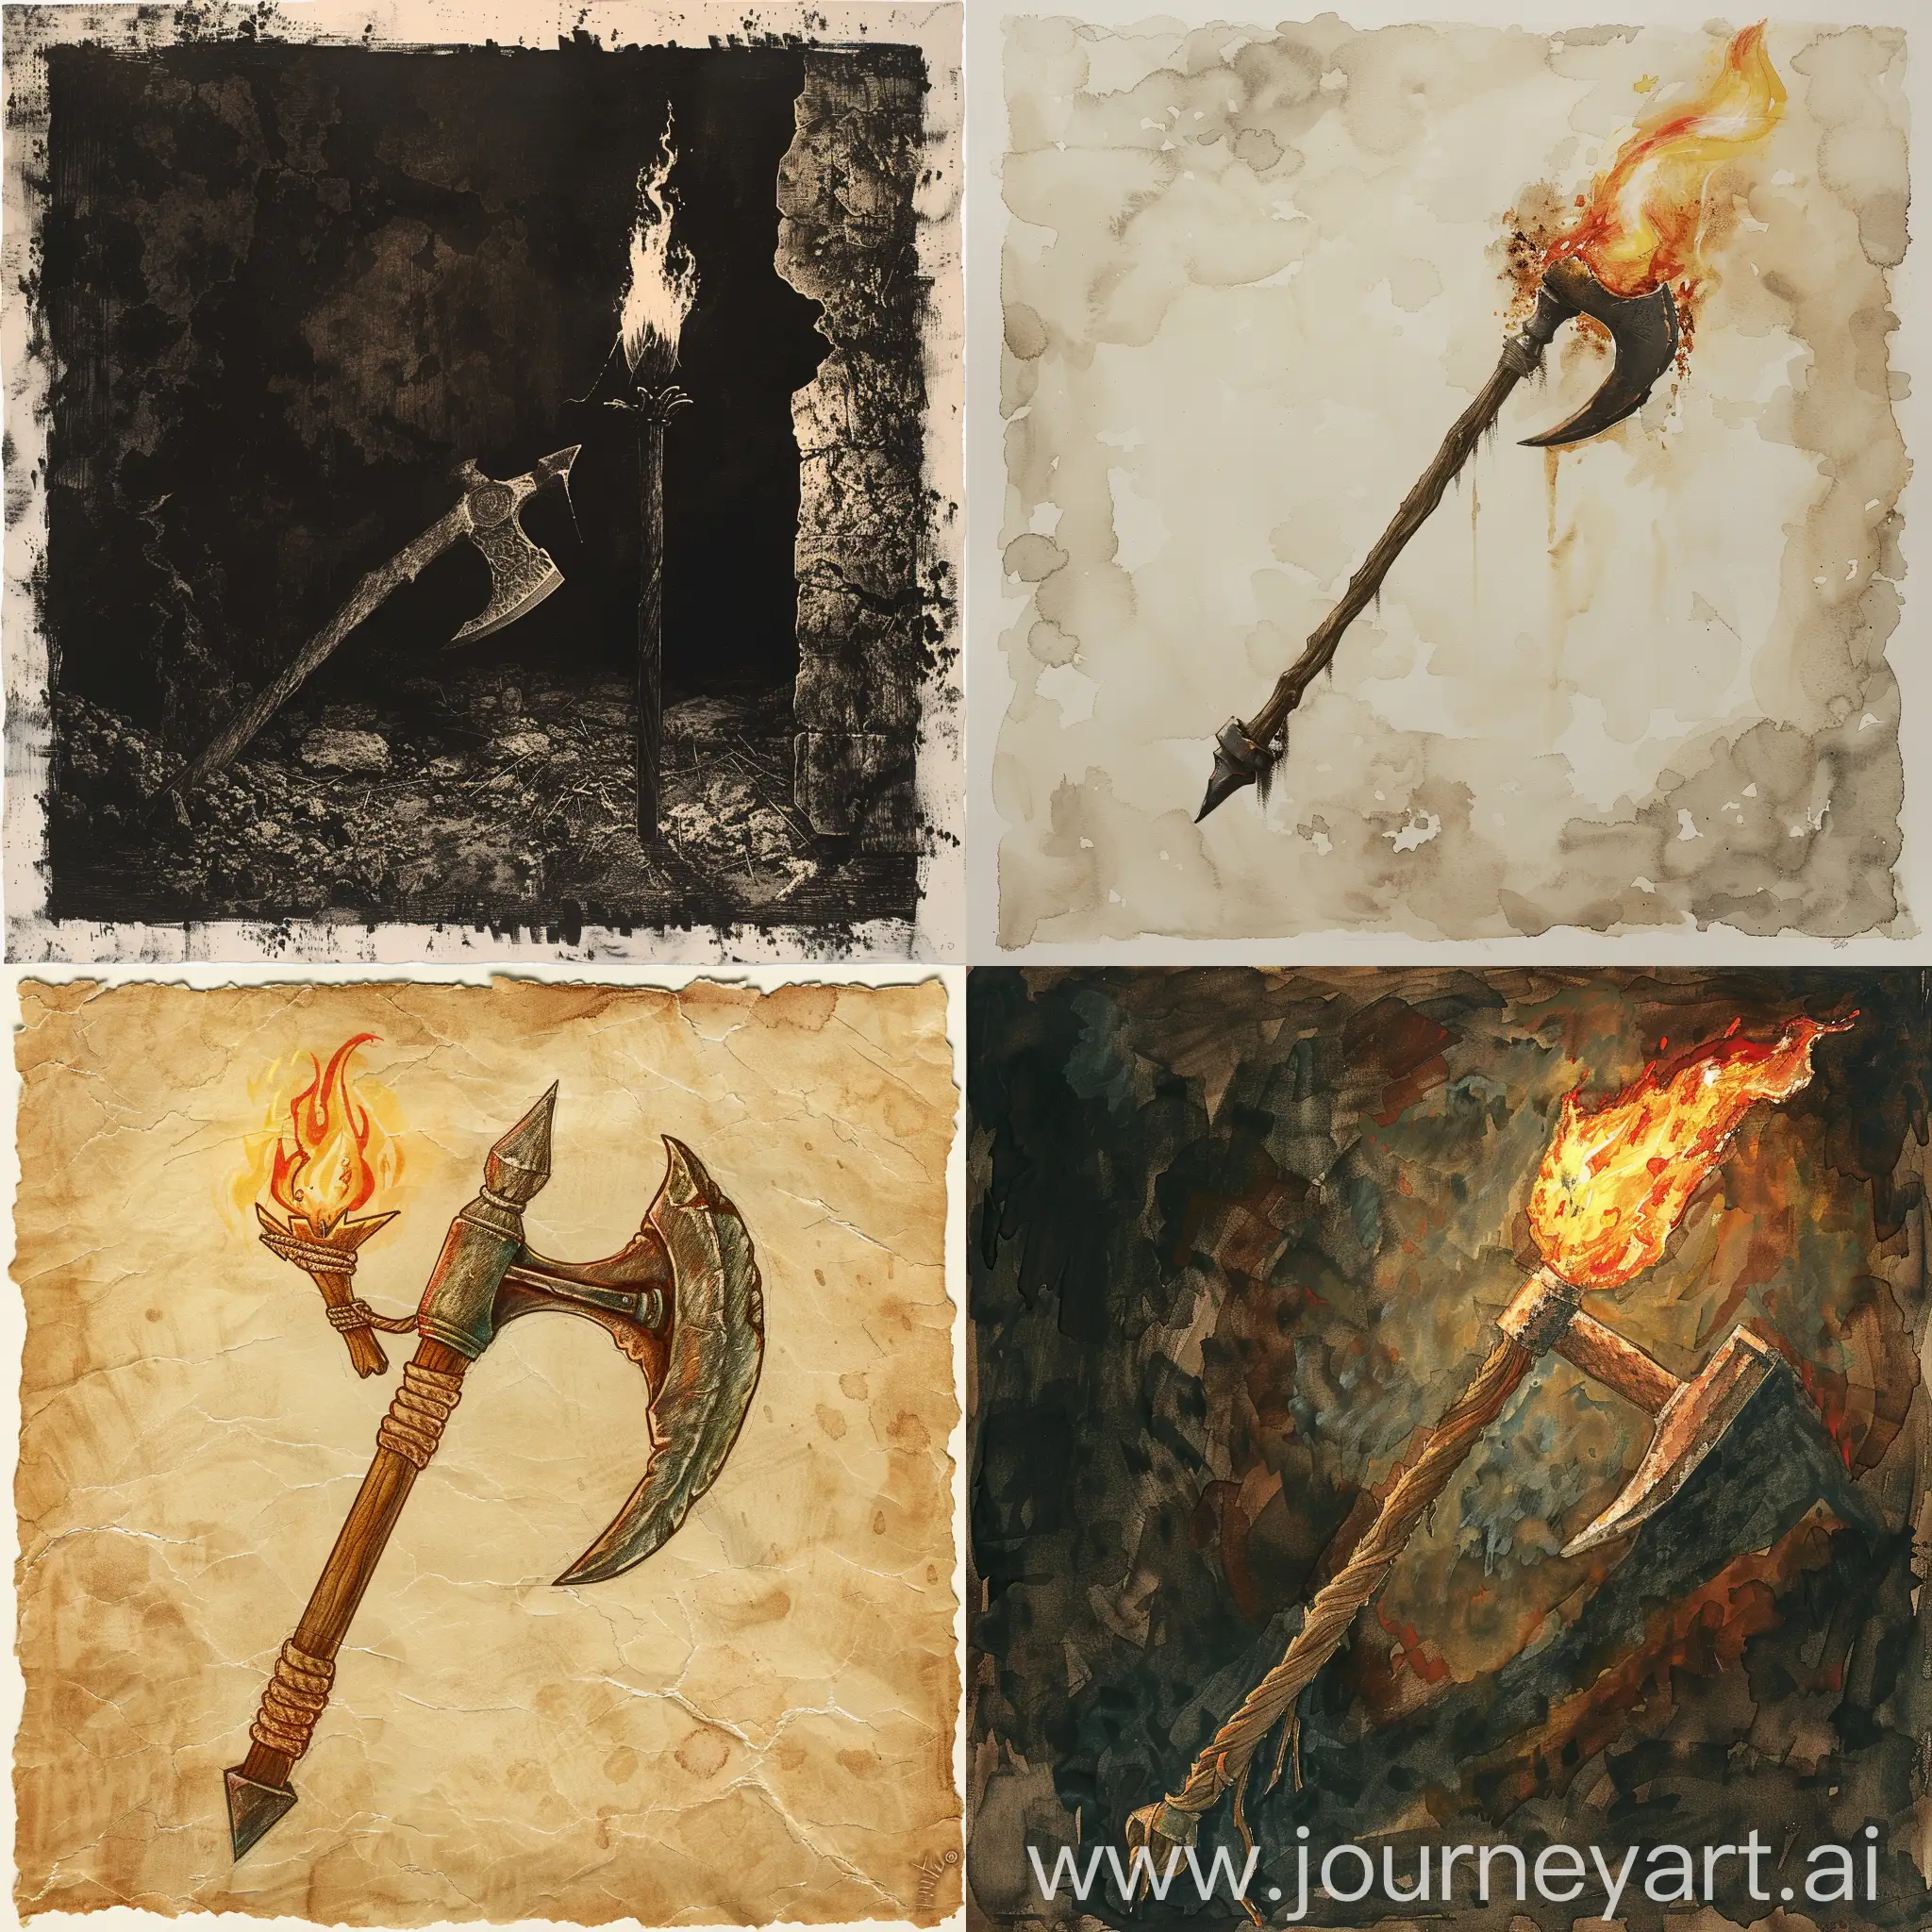 Medieval-Style-Illustration-of-Pickaxe-and-Torch-on-Paper